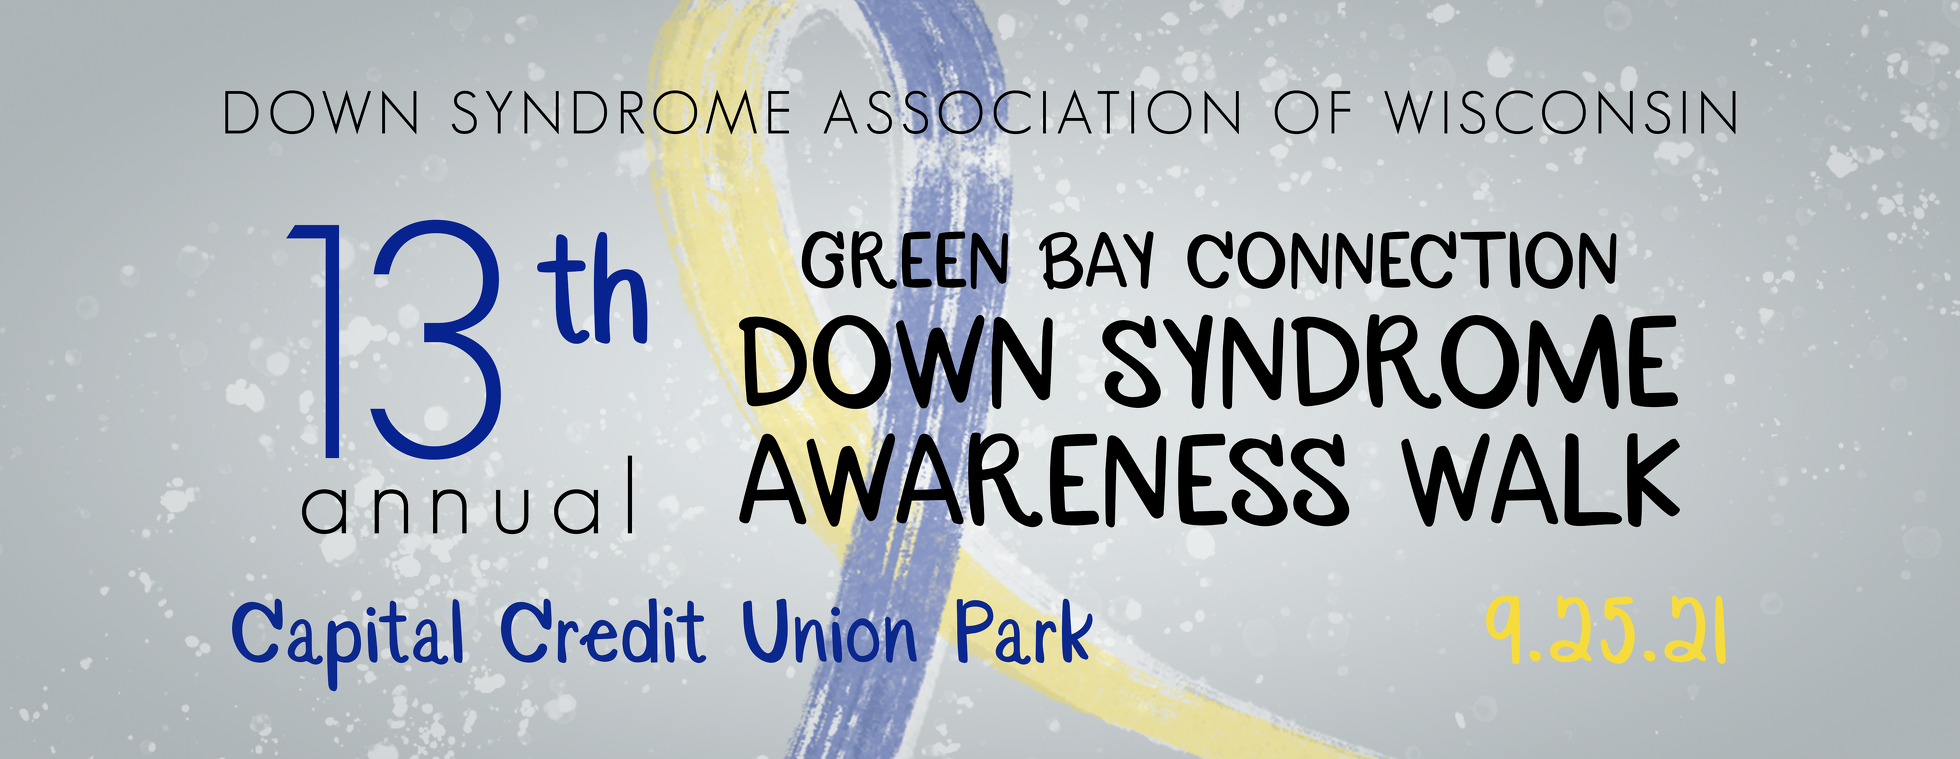 13th Annual DSAW-Green Bay Down Syndrome Awareness Walk